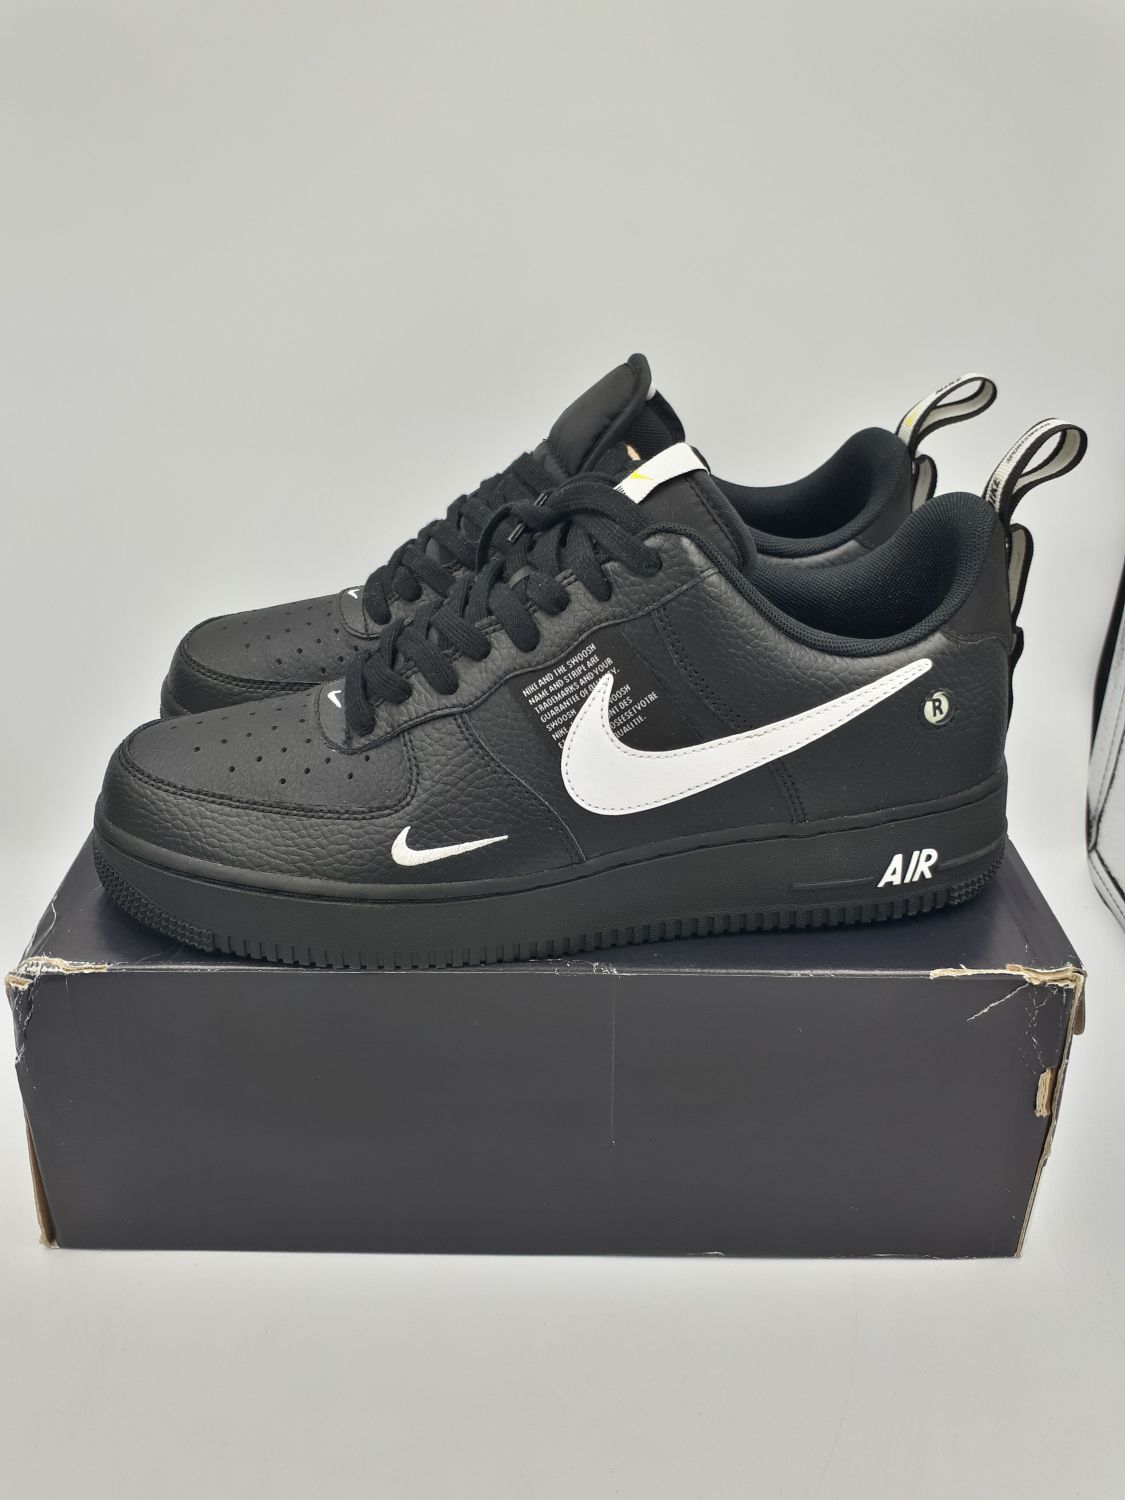 Nike Air Force 1 Low Utility Black White | AfterMarket